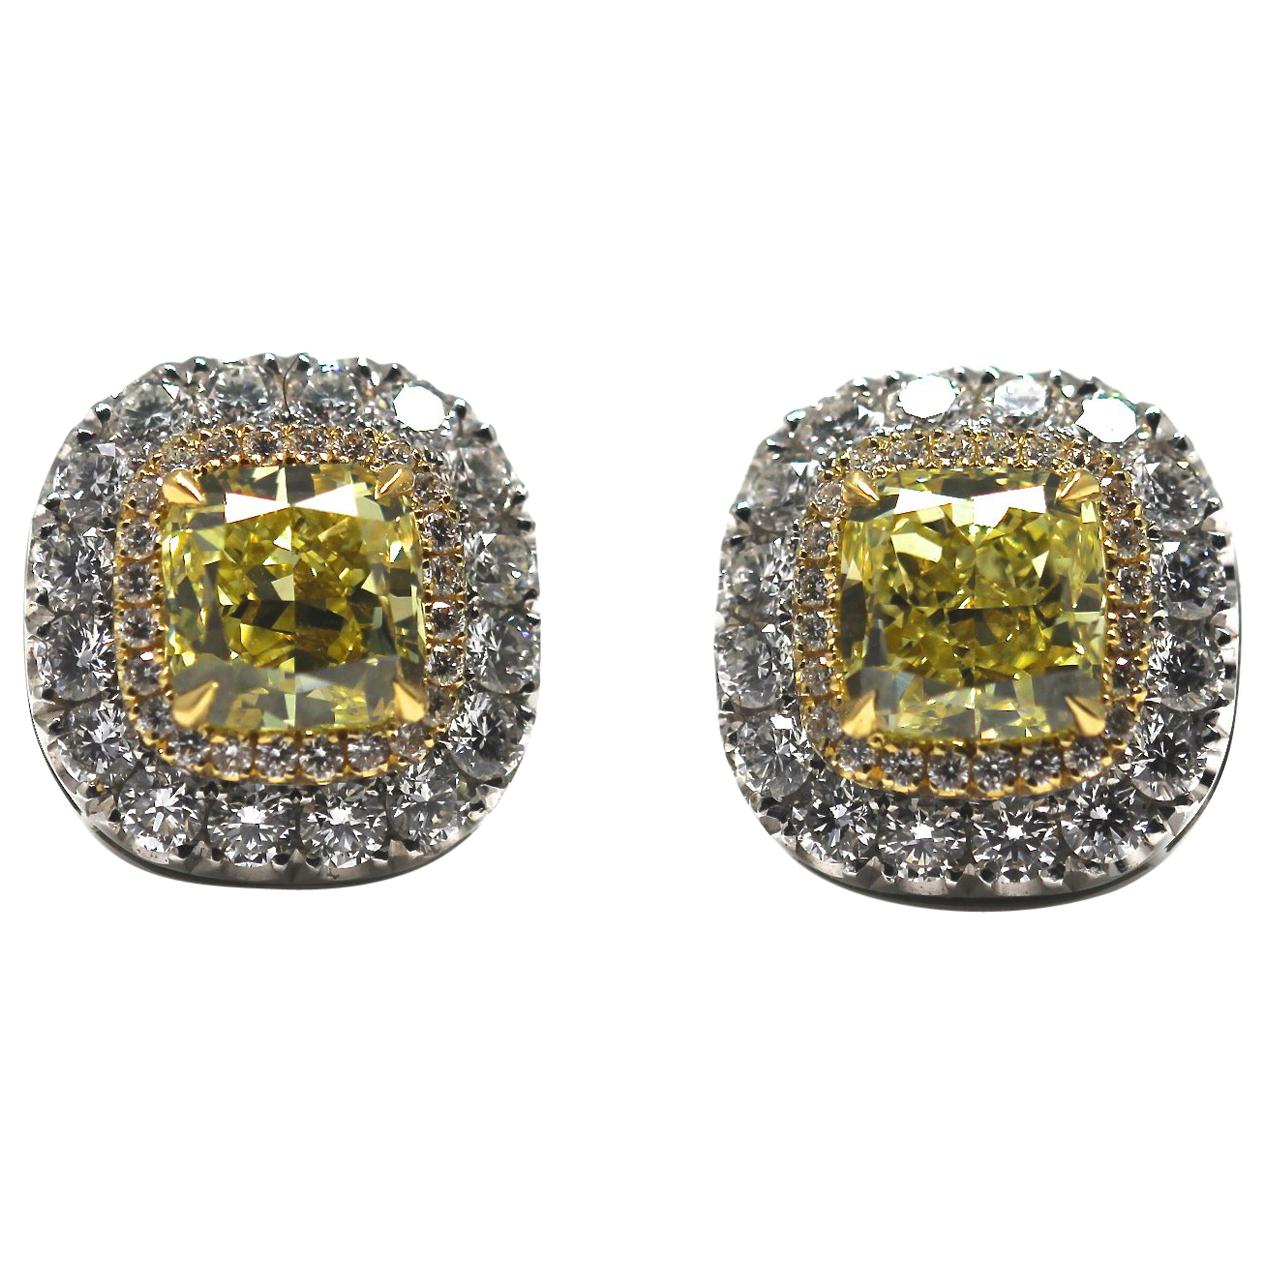 GIA Certified Fancy Intense Yellow Diamond Earrings Mounted in Platinum and Gold